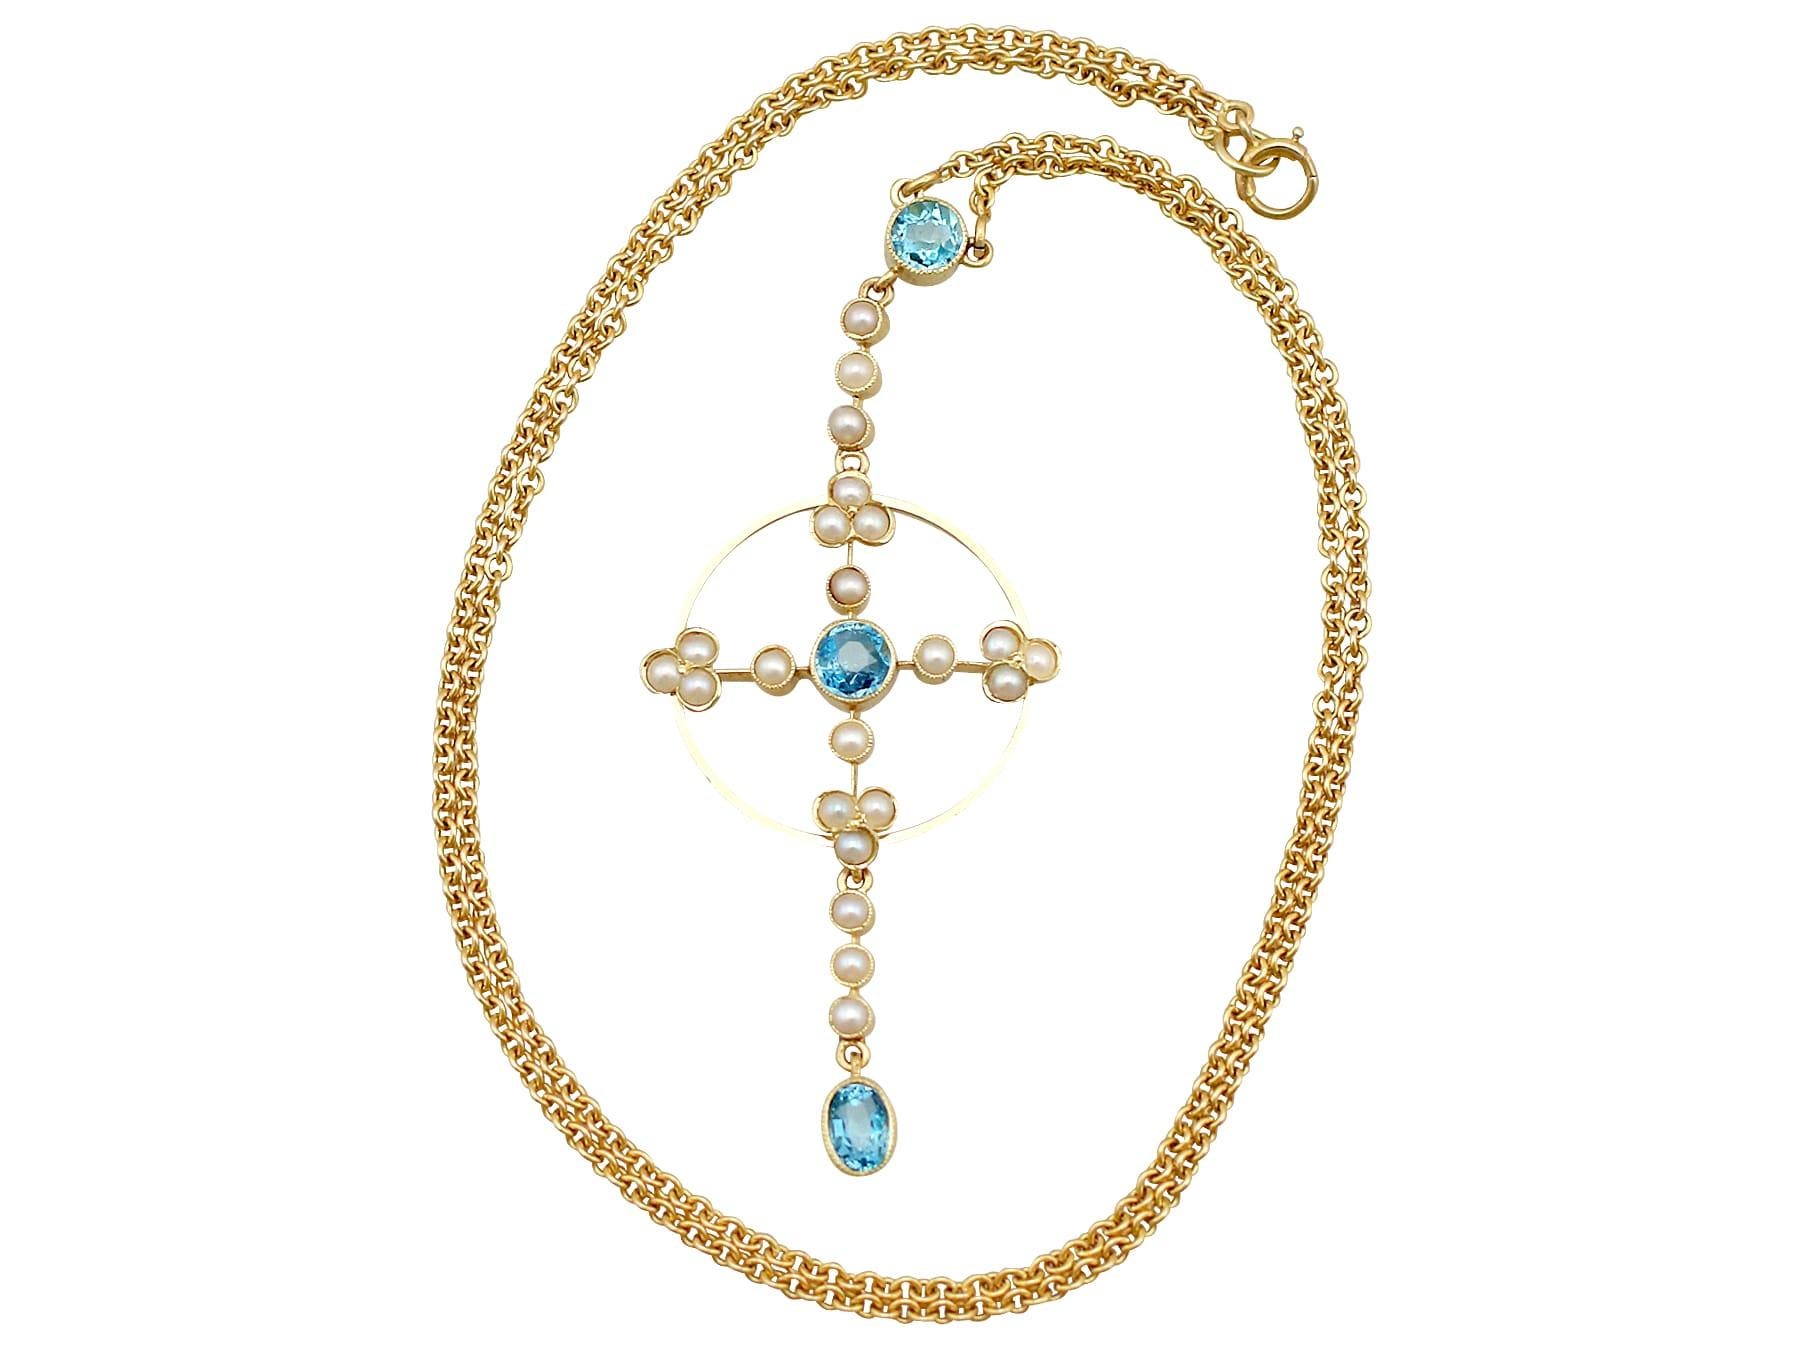 A fine and impressive antique 0.59 carat aquamarine and seed pearl pendant in 15 karat yellow gold; part of our diverse antique jewelry and estate jewelry collections.

This fine and impressive Victorian aquamarine and pearl pendant has been crafted